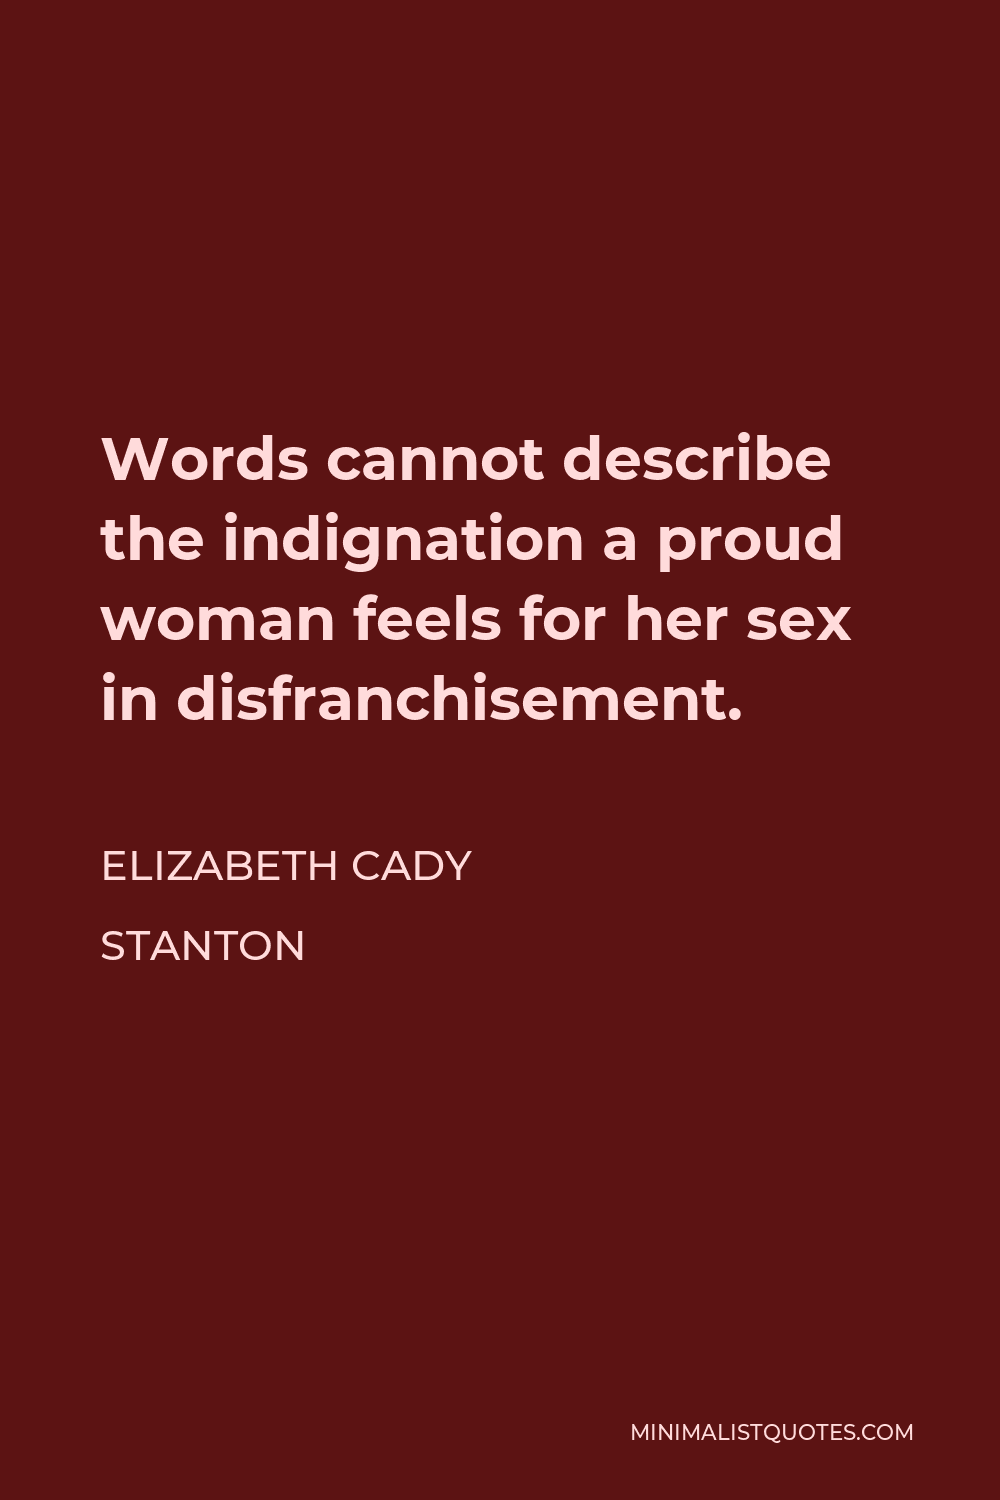 Elizabeth Cady Stanton Quote - Words cannot describe the indignation a proud woman feels for her sex in disfranchisement.